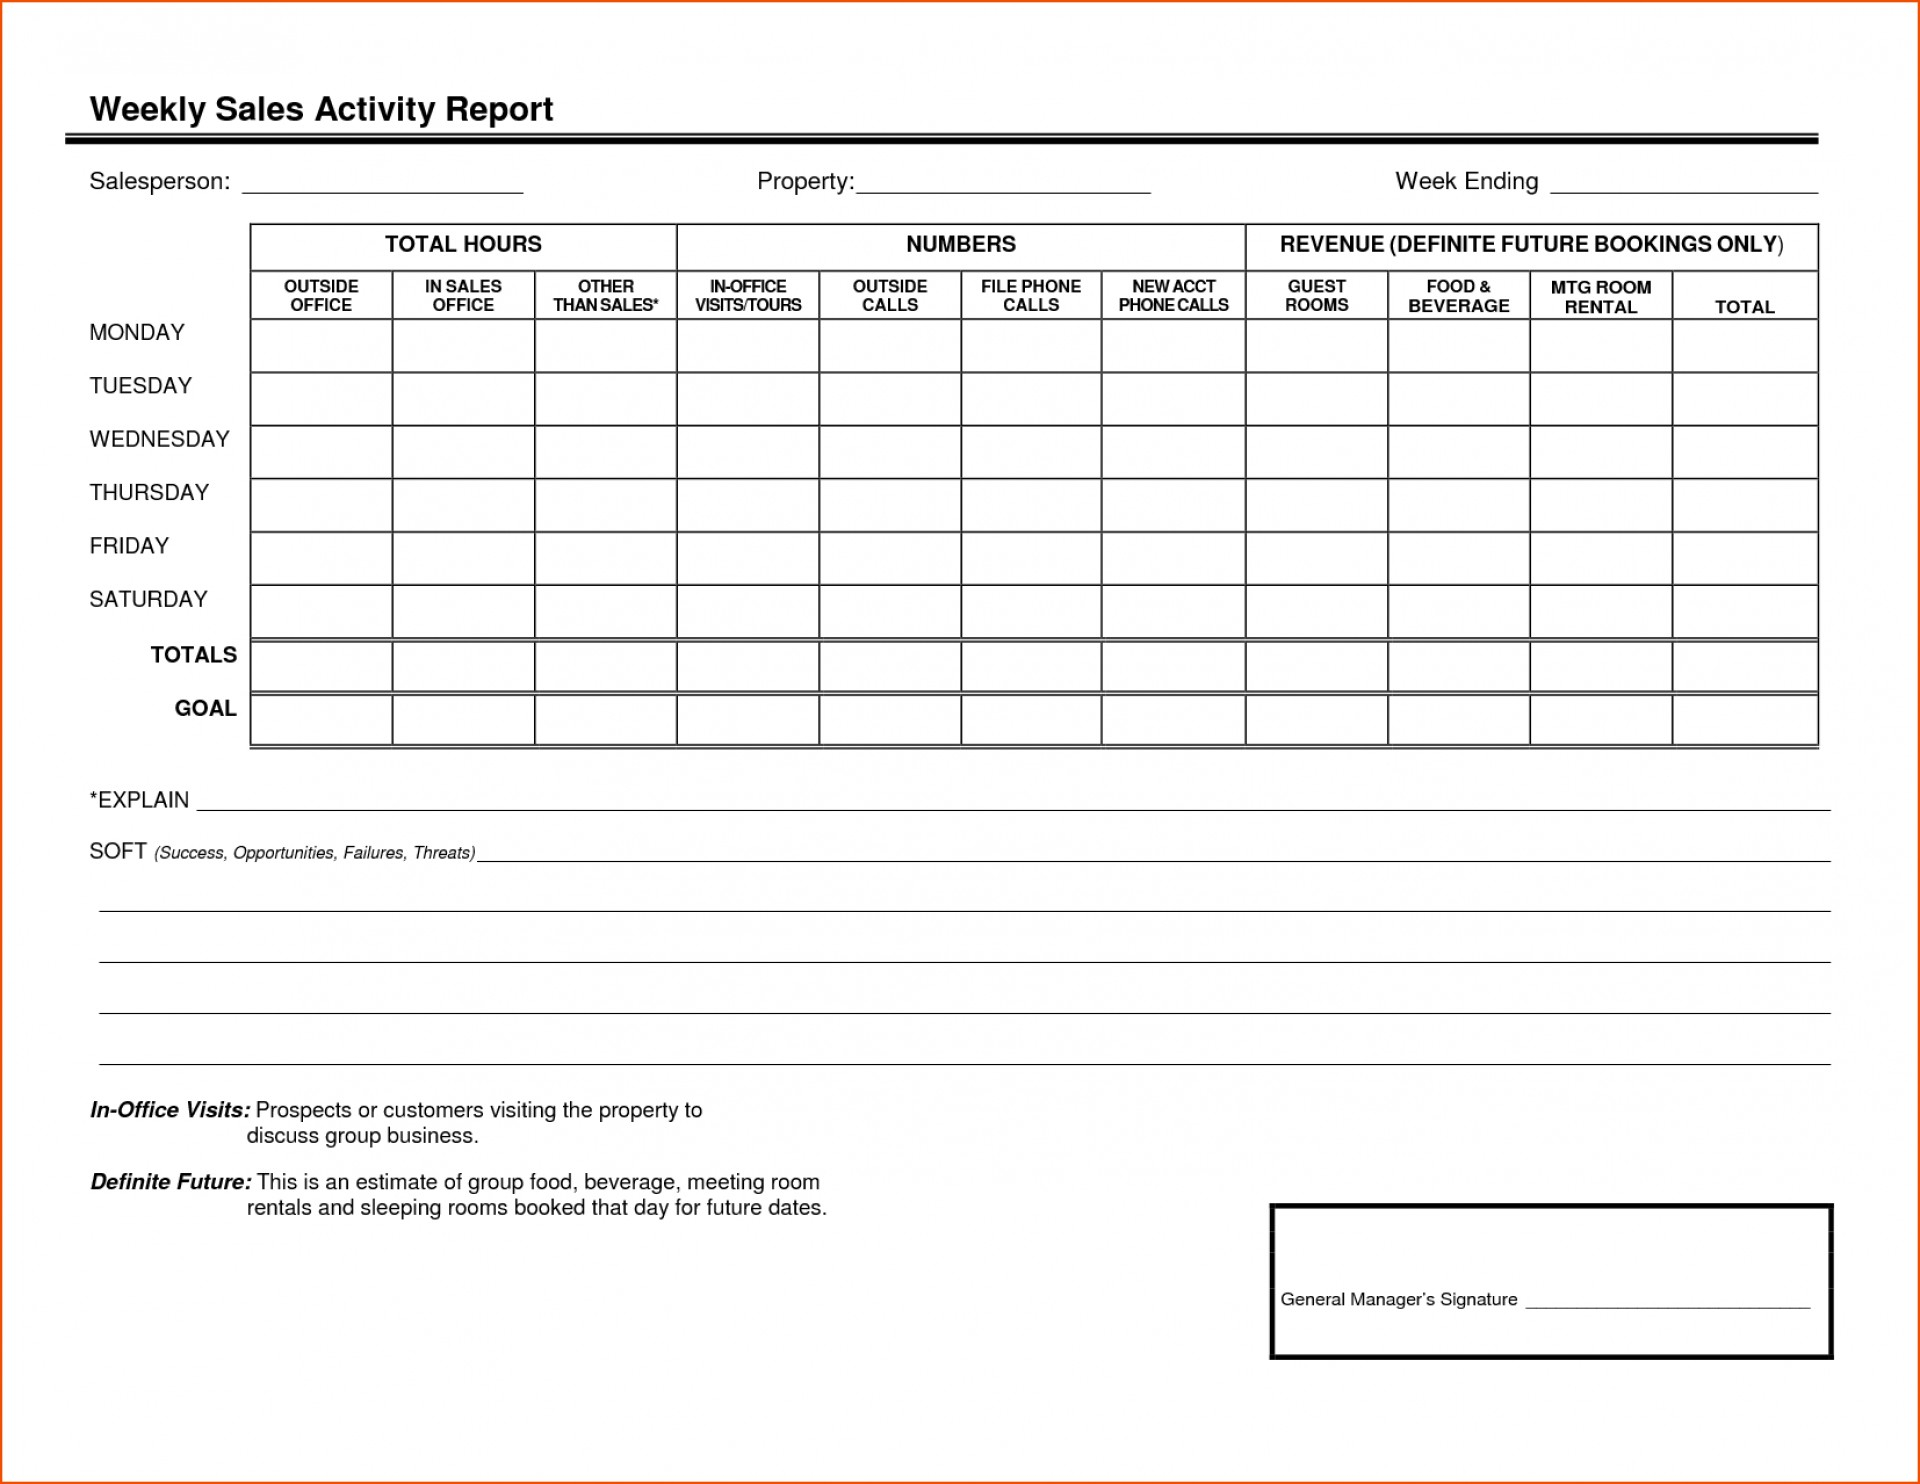 001 Sales Calls Report Template Call Awesome Ideas Daily In In Daily Sales Call Report Template Free Download